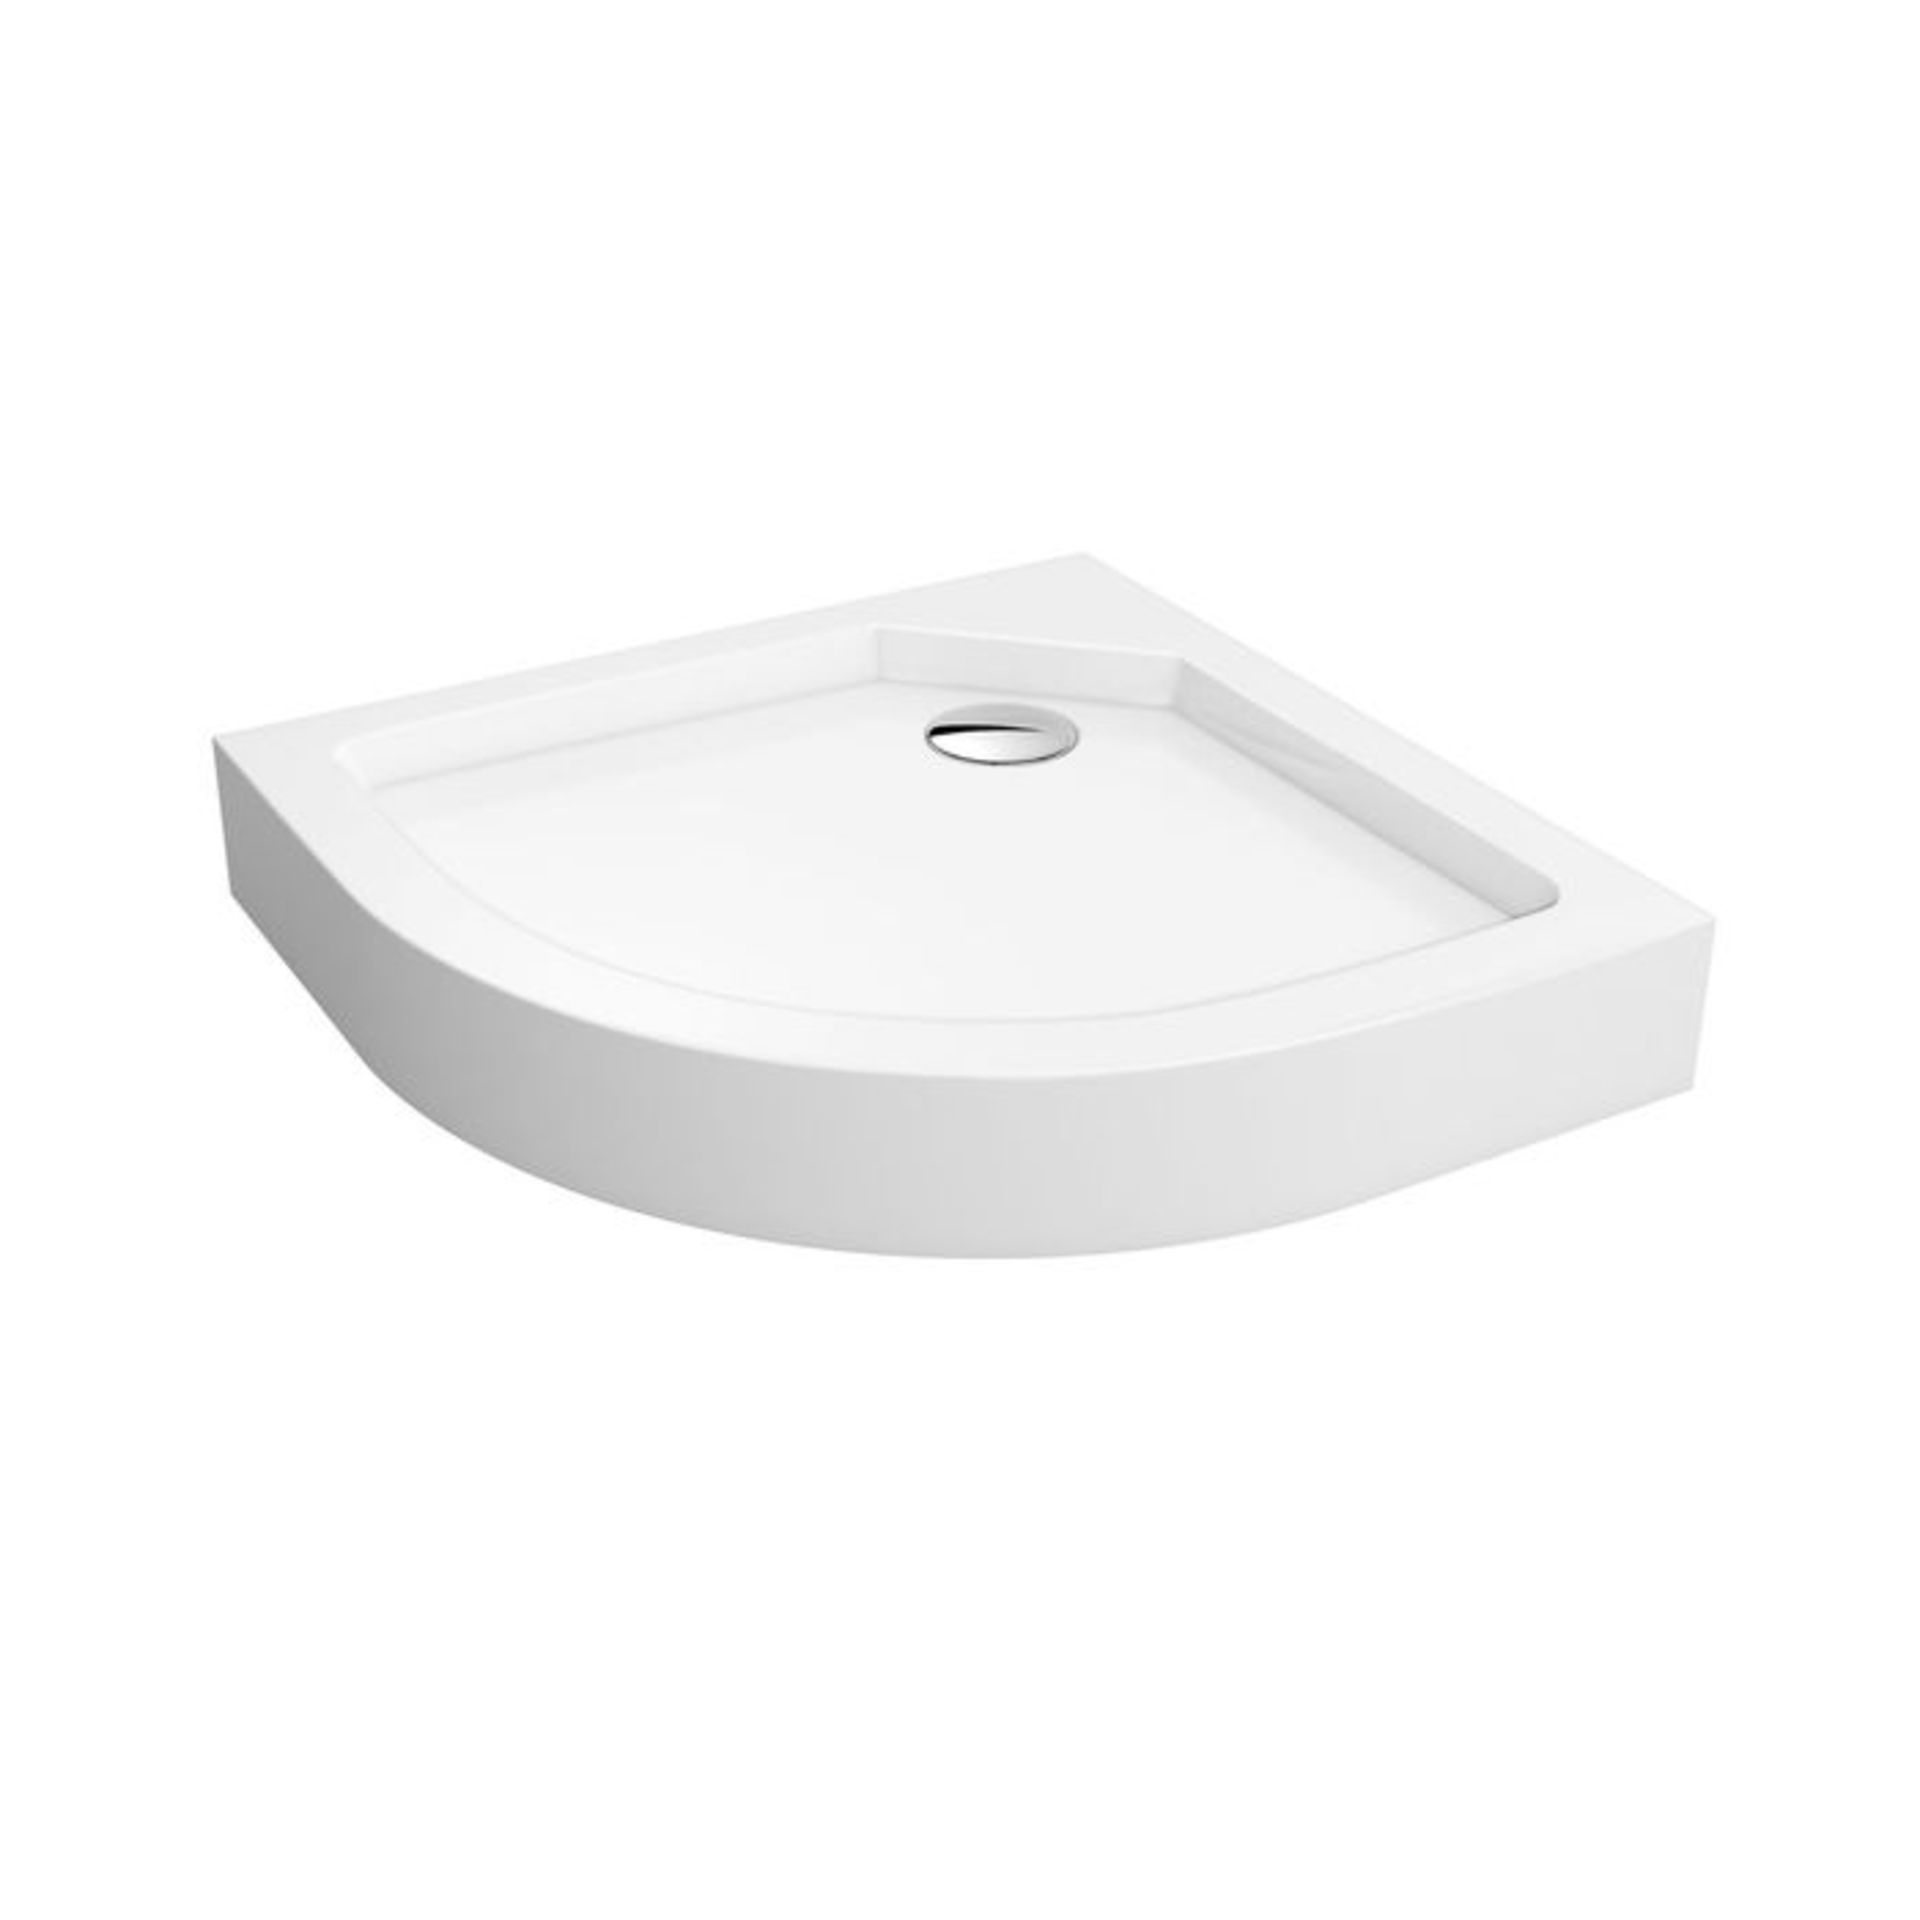 (AH82) 800x800mm Quadrant Easy Plumb Shower Tray. RRP £114.99. Easy to clean waste container Made - Image 2 of 2